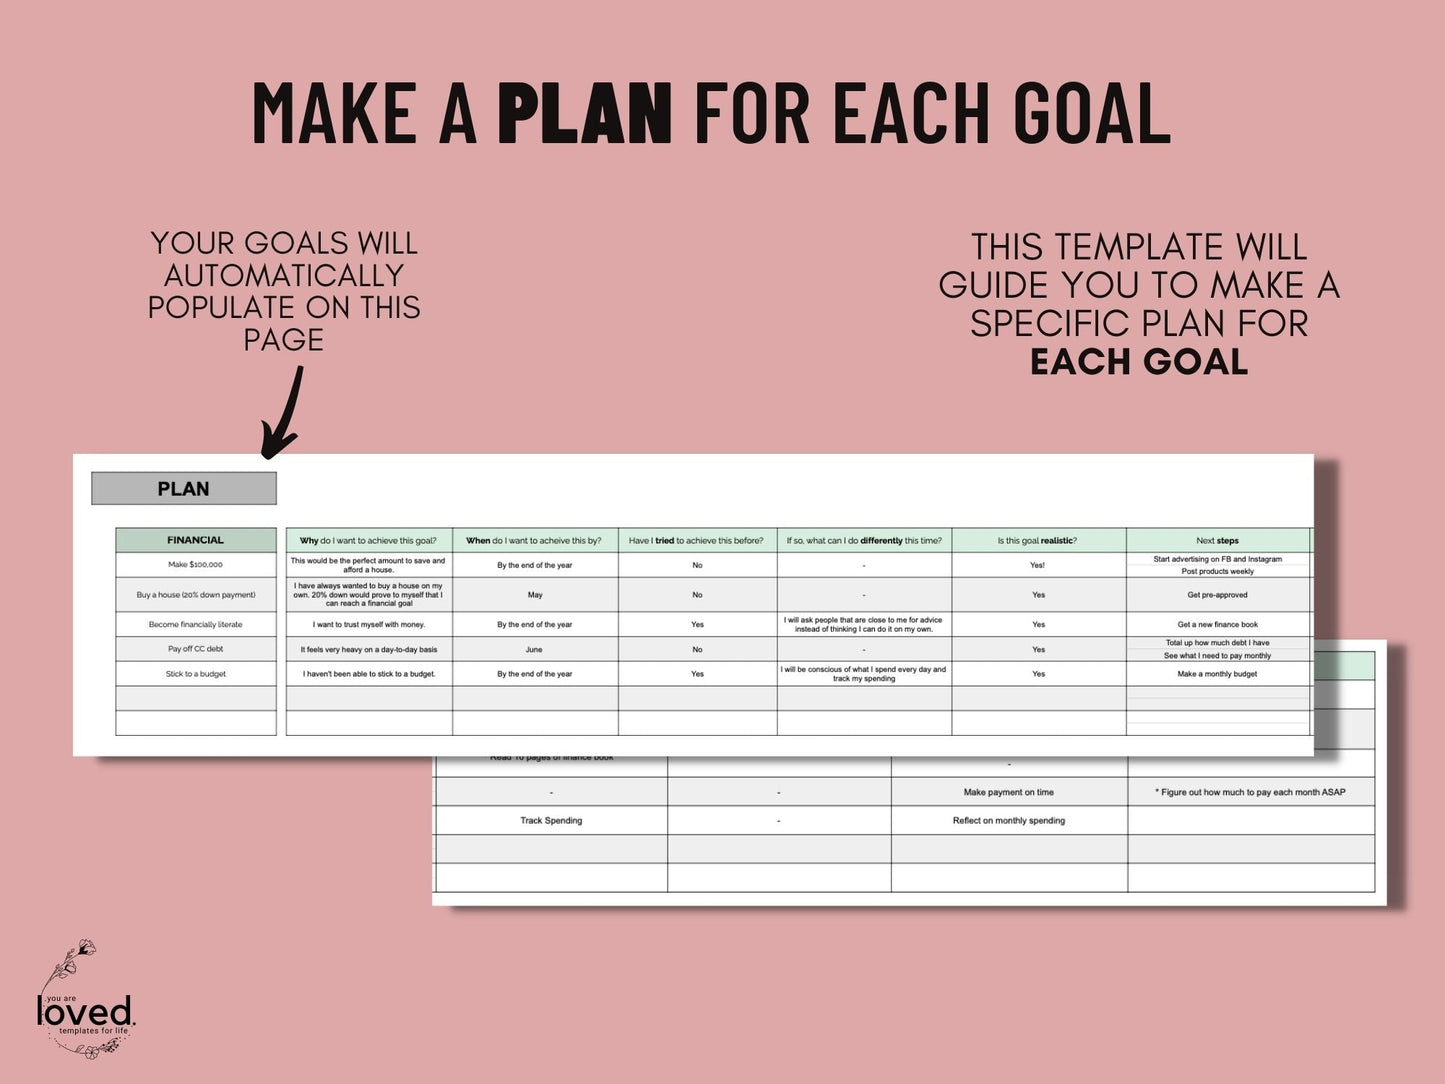 New Year's Resolution Planner | Goal Planner | Google Sheets